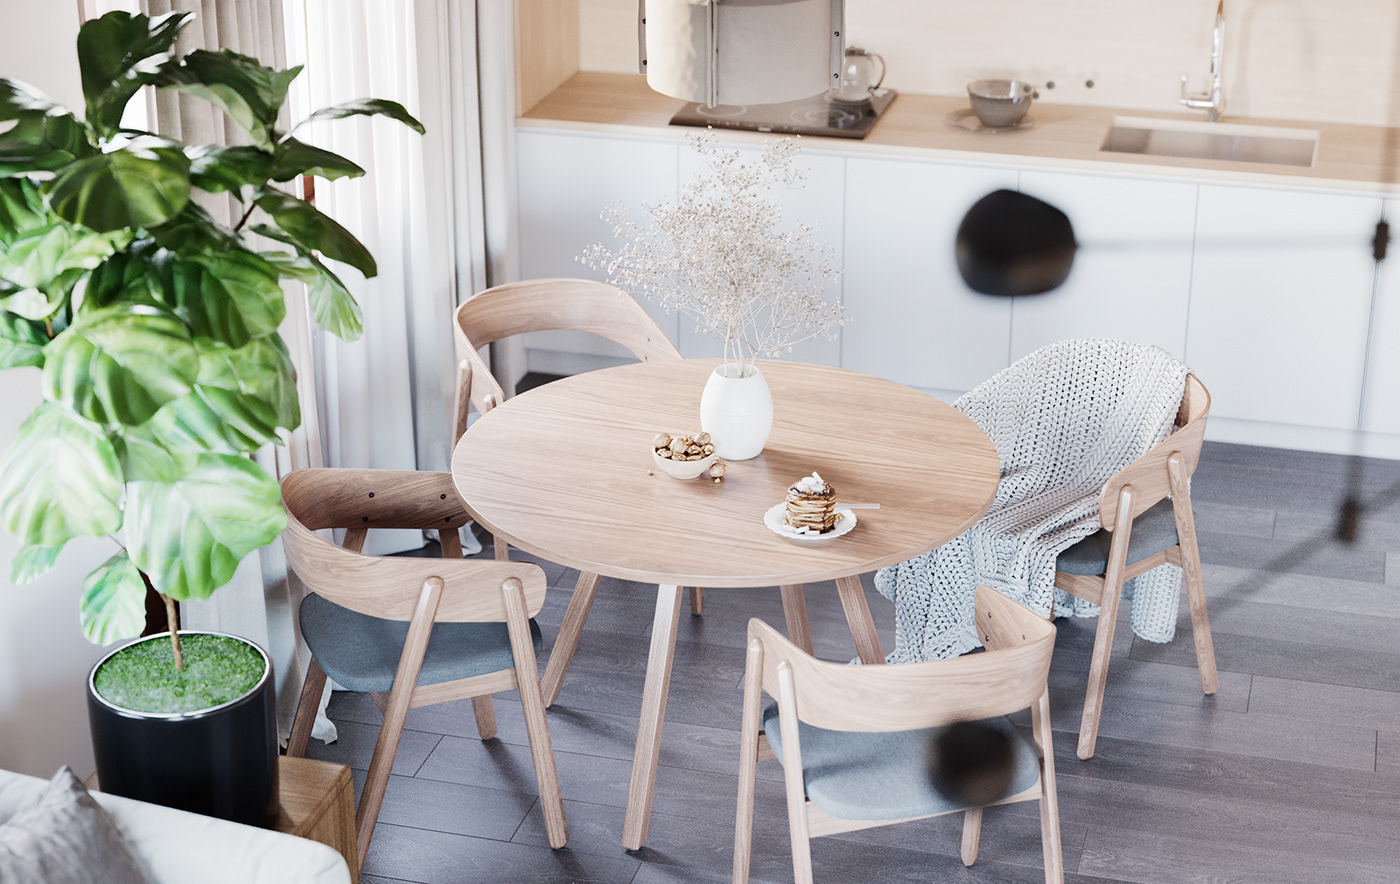 A small set of dining chairs and table made of wood help to increase the free space.